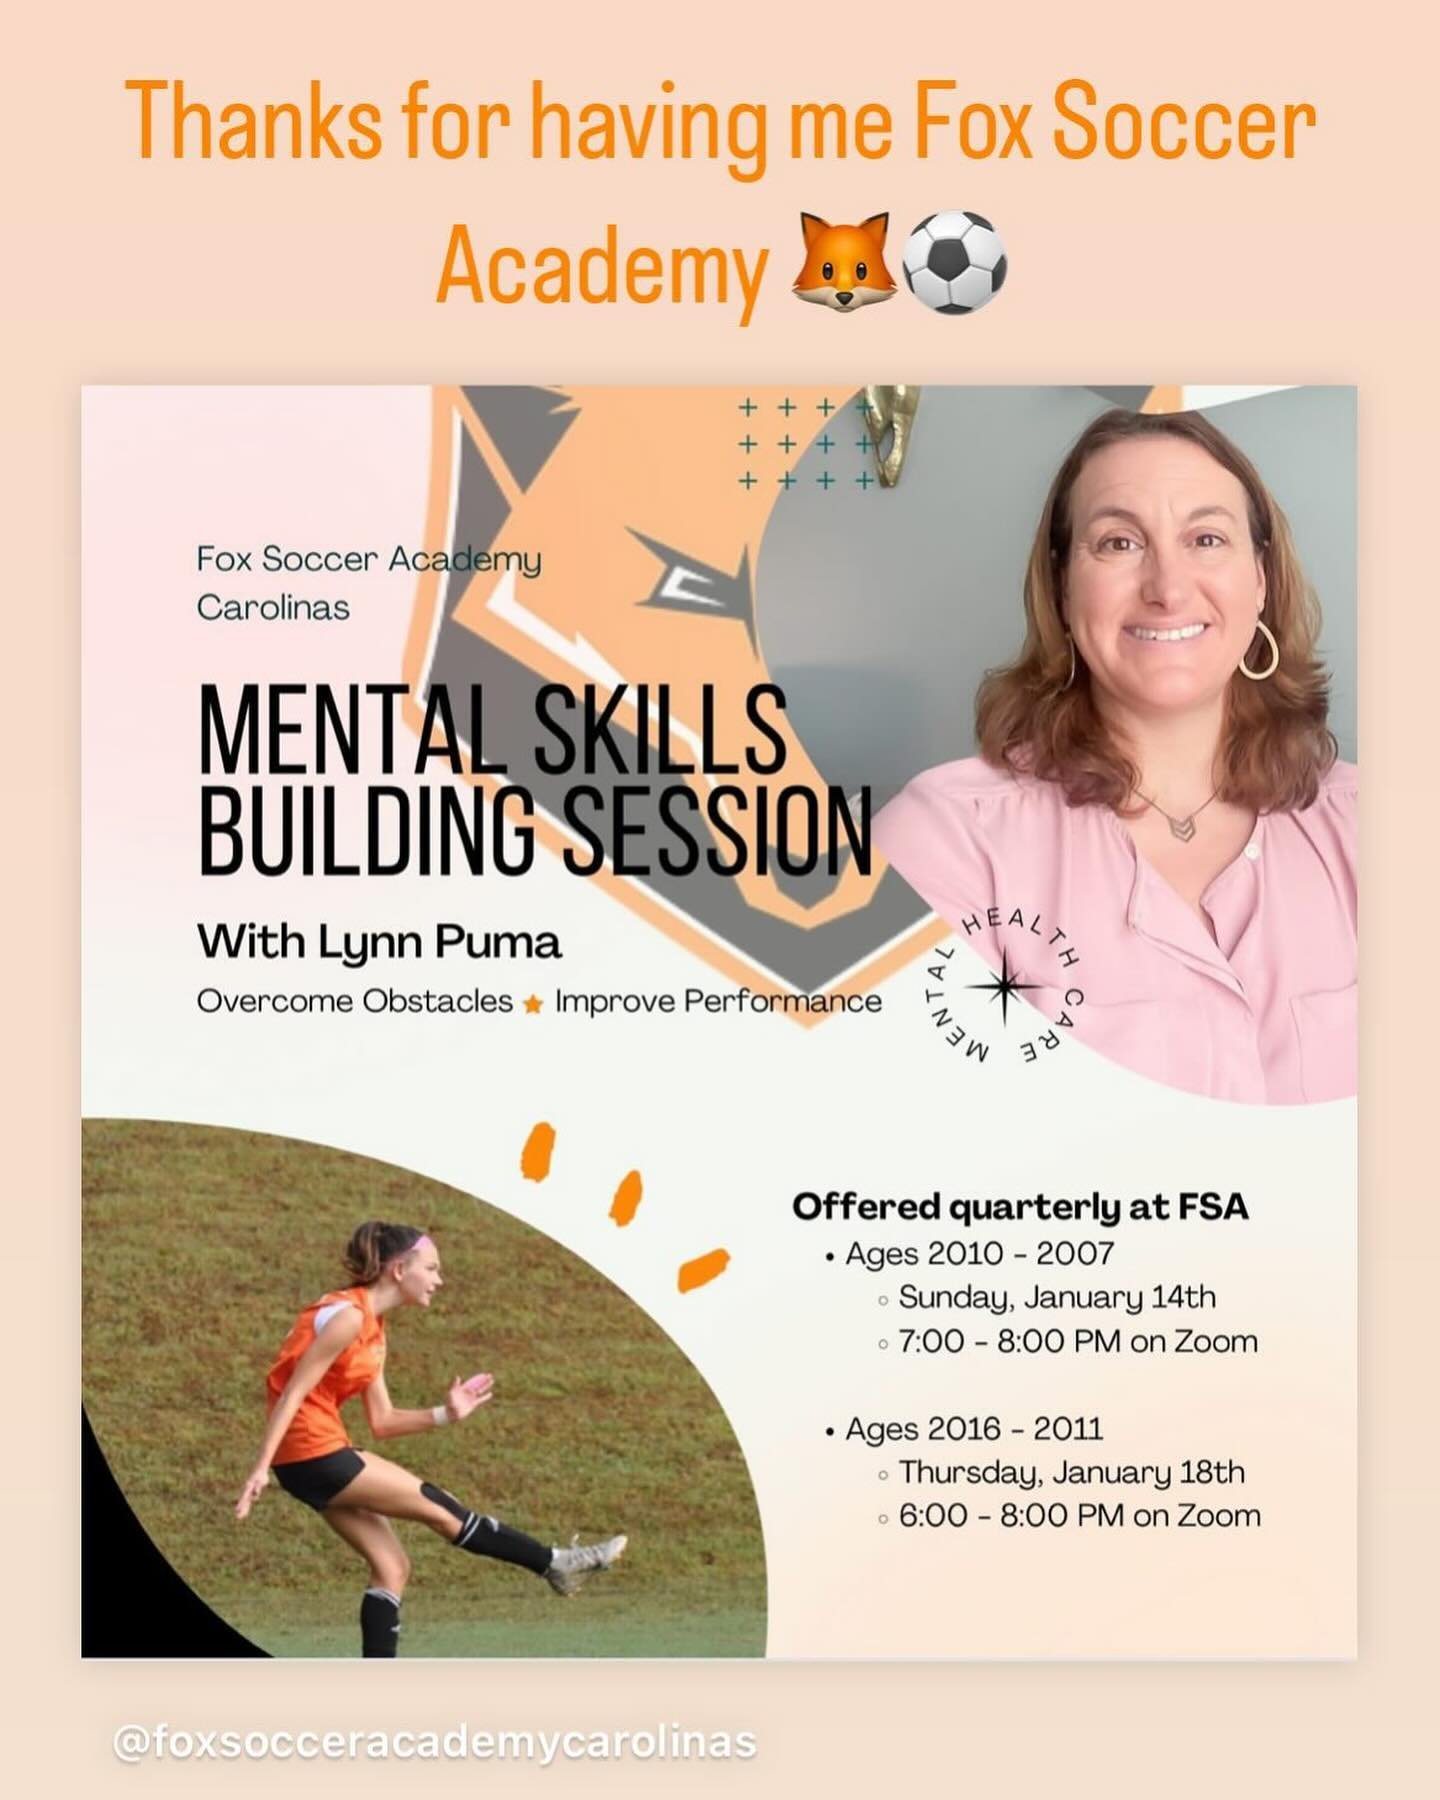 Thank you so much for having me Fox Soccer Academy. Even with the technical difficulties we had a great mental skills building session with the older players last night. I am looking forward to Thursday&rsquo;s session with younger players and parent